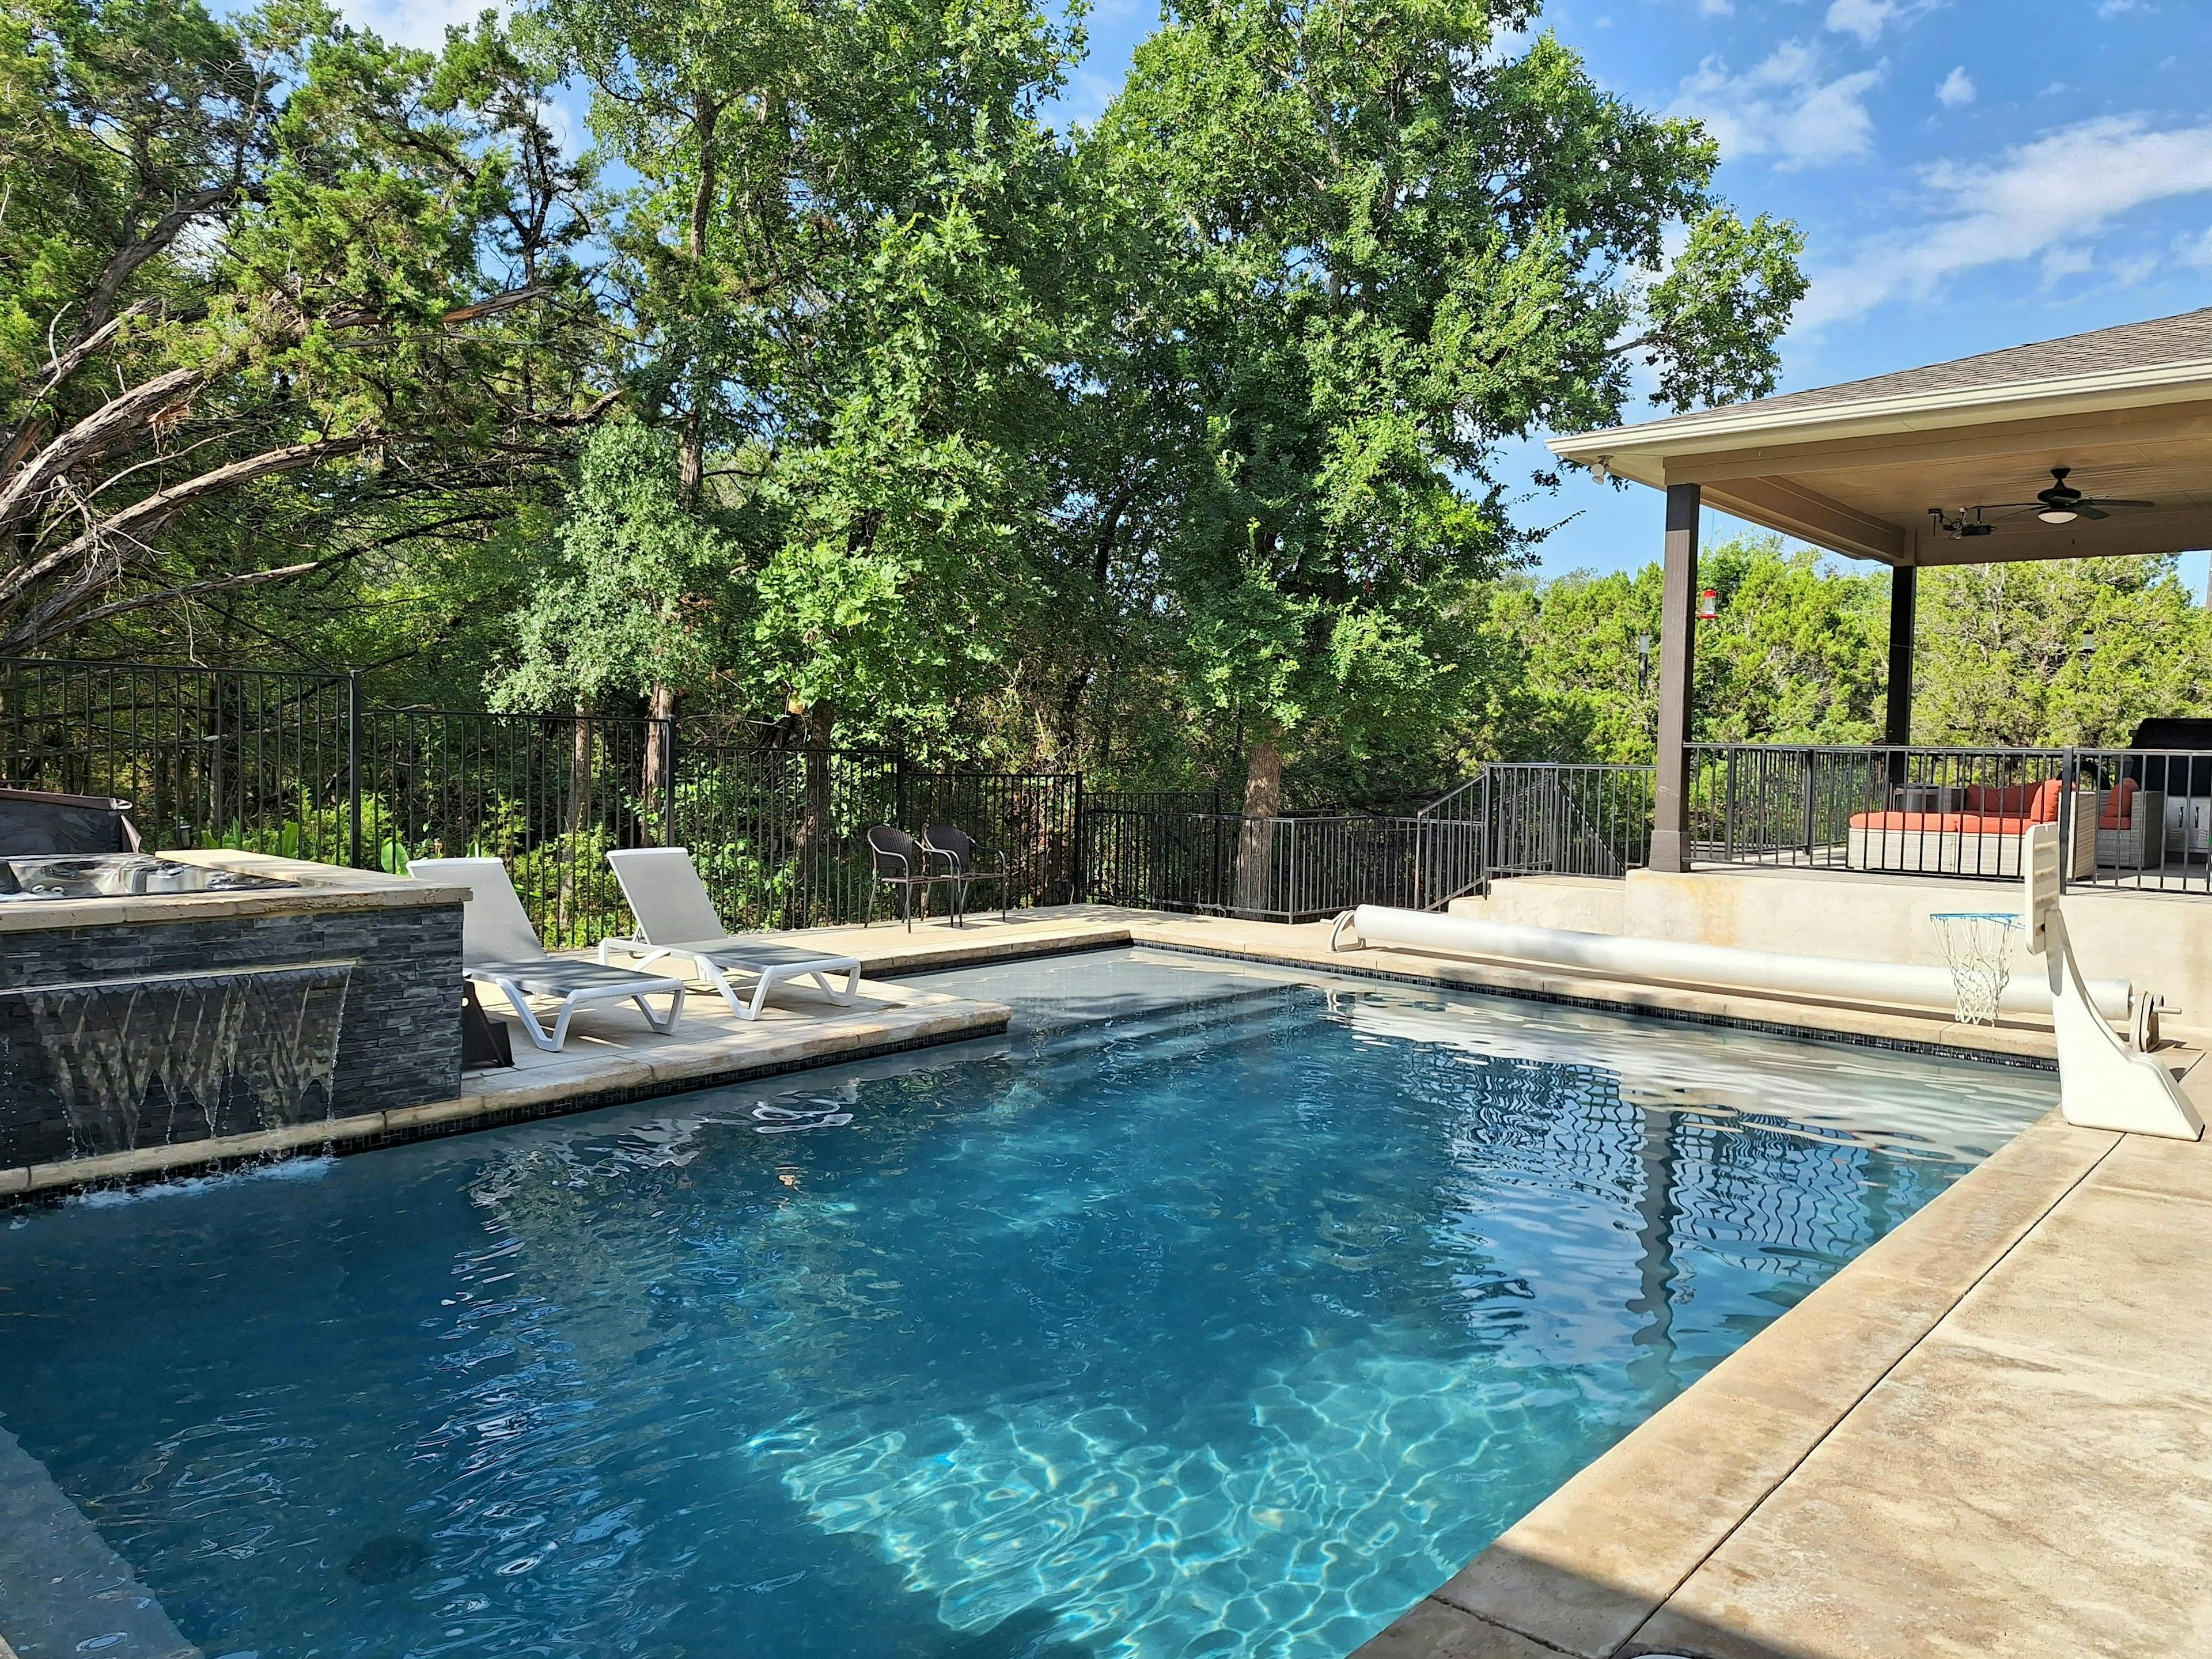 Pet and Family Paradise! Beautiful Secluded Pool with Hot Tub, Kitchenette, and Fantastic Amenities!